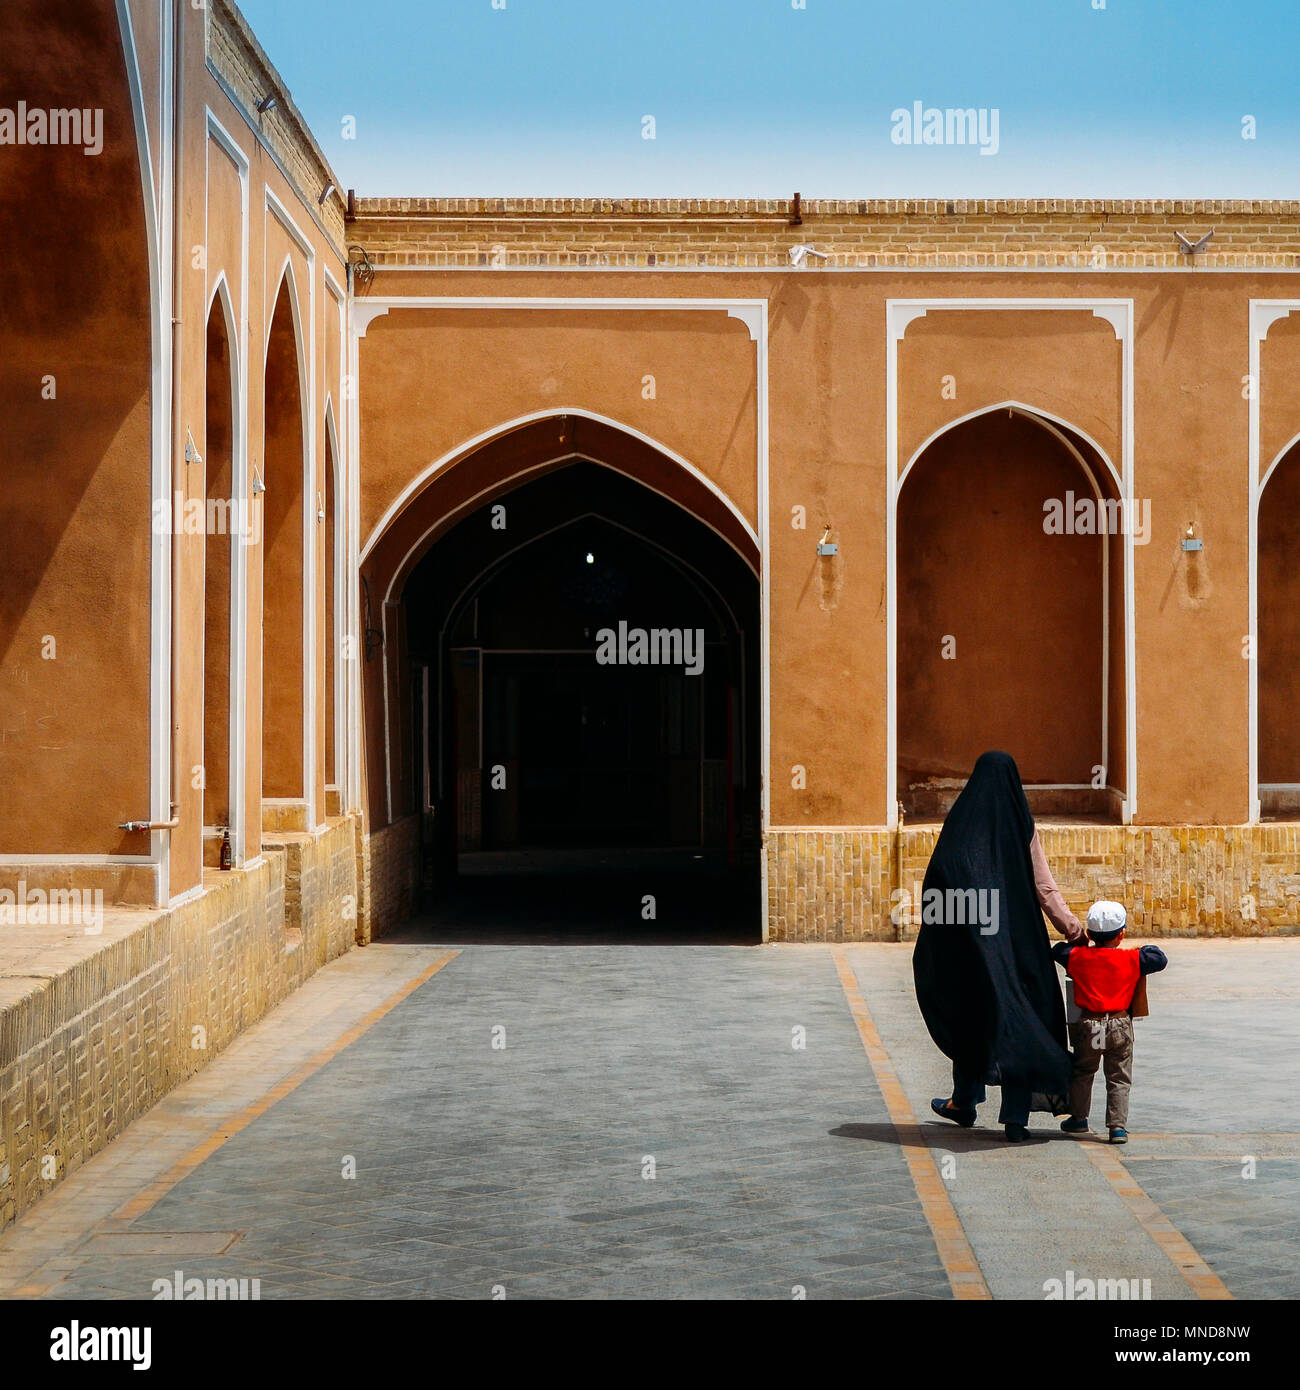 Unidentifiable woman wearing a traditional black dress in Iran, known as a chador, holds the hand of a young boy. Islamic architecture in background with ancient arches Stock Photo